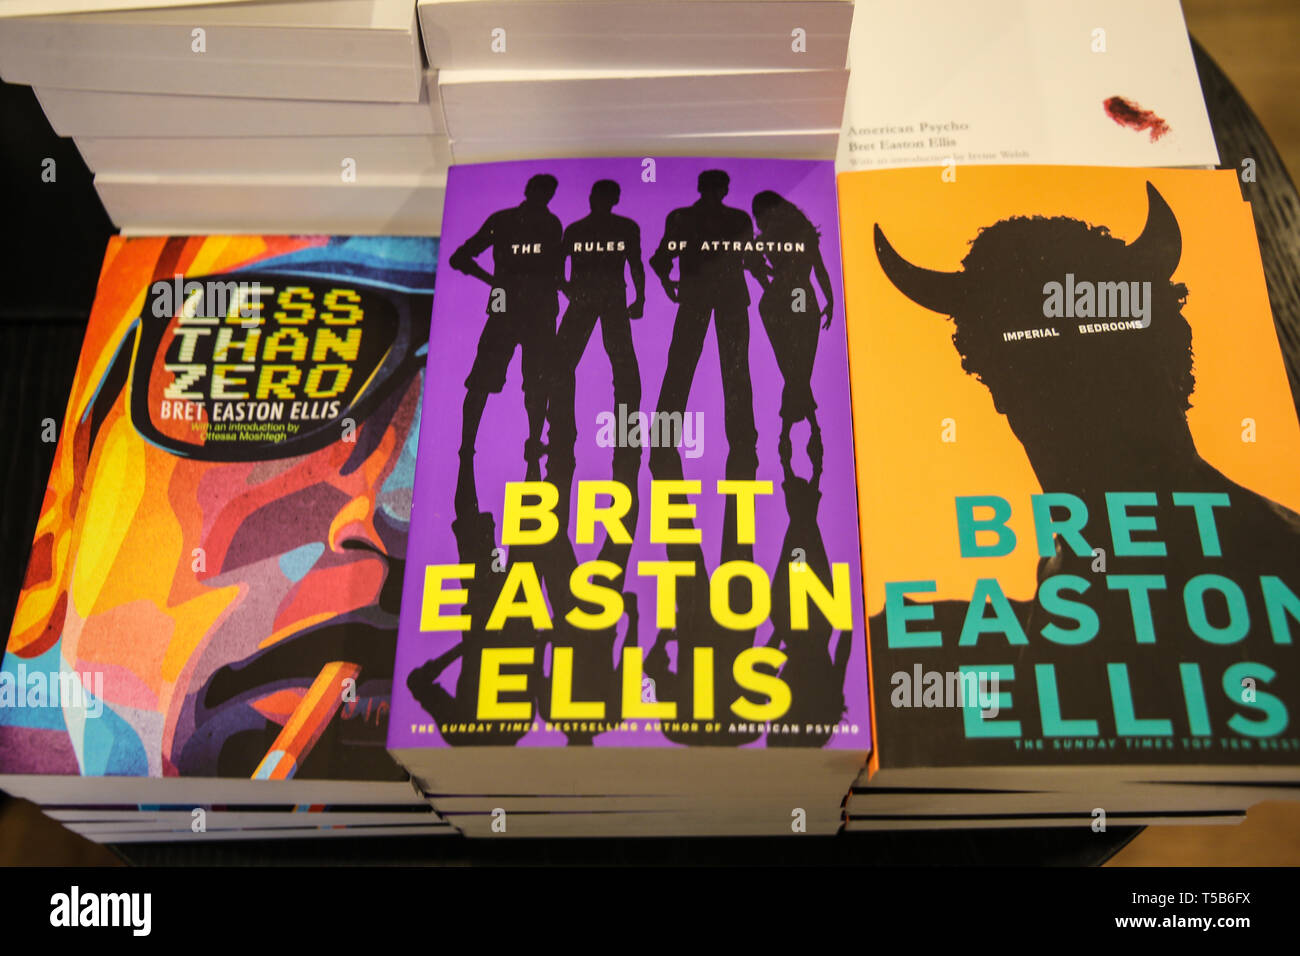 https://c8.alamy.com/comp/T5B6FX/london-uk-23rd-apr-2019-best-selling-author-bret-easton-ellis-famous-for-his-best-sellers-american-psycho-less-than-zero-where-and-countless-more-signing-books-today-at-waterston-book-store-in-leadehall-market-credit-paul-quezada-neimanalamy-live-news-T5B6FX.jpg